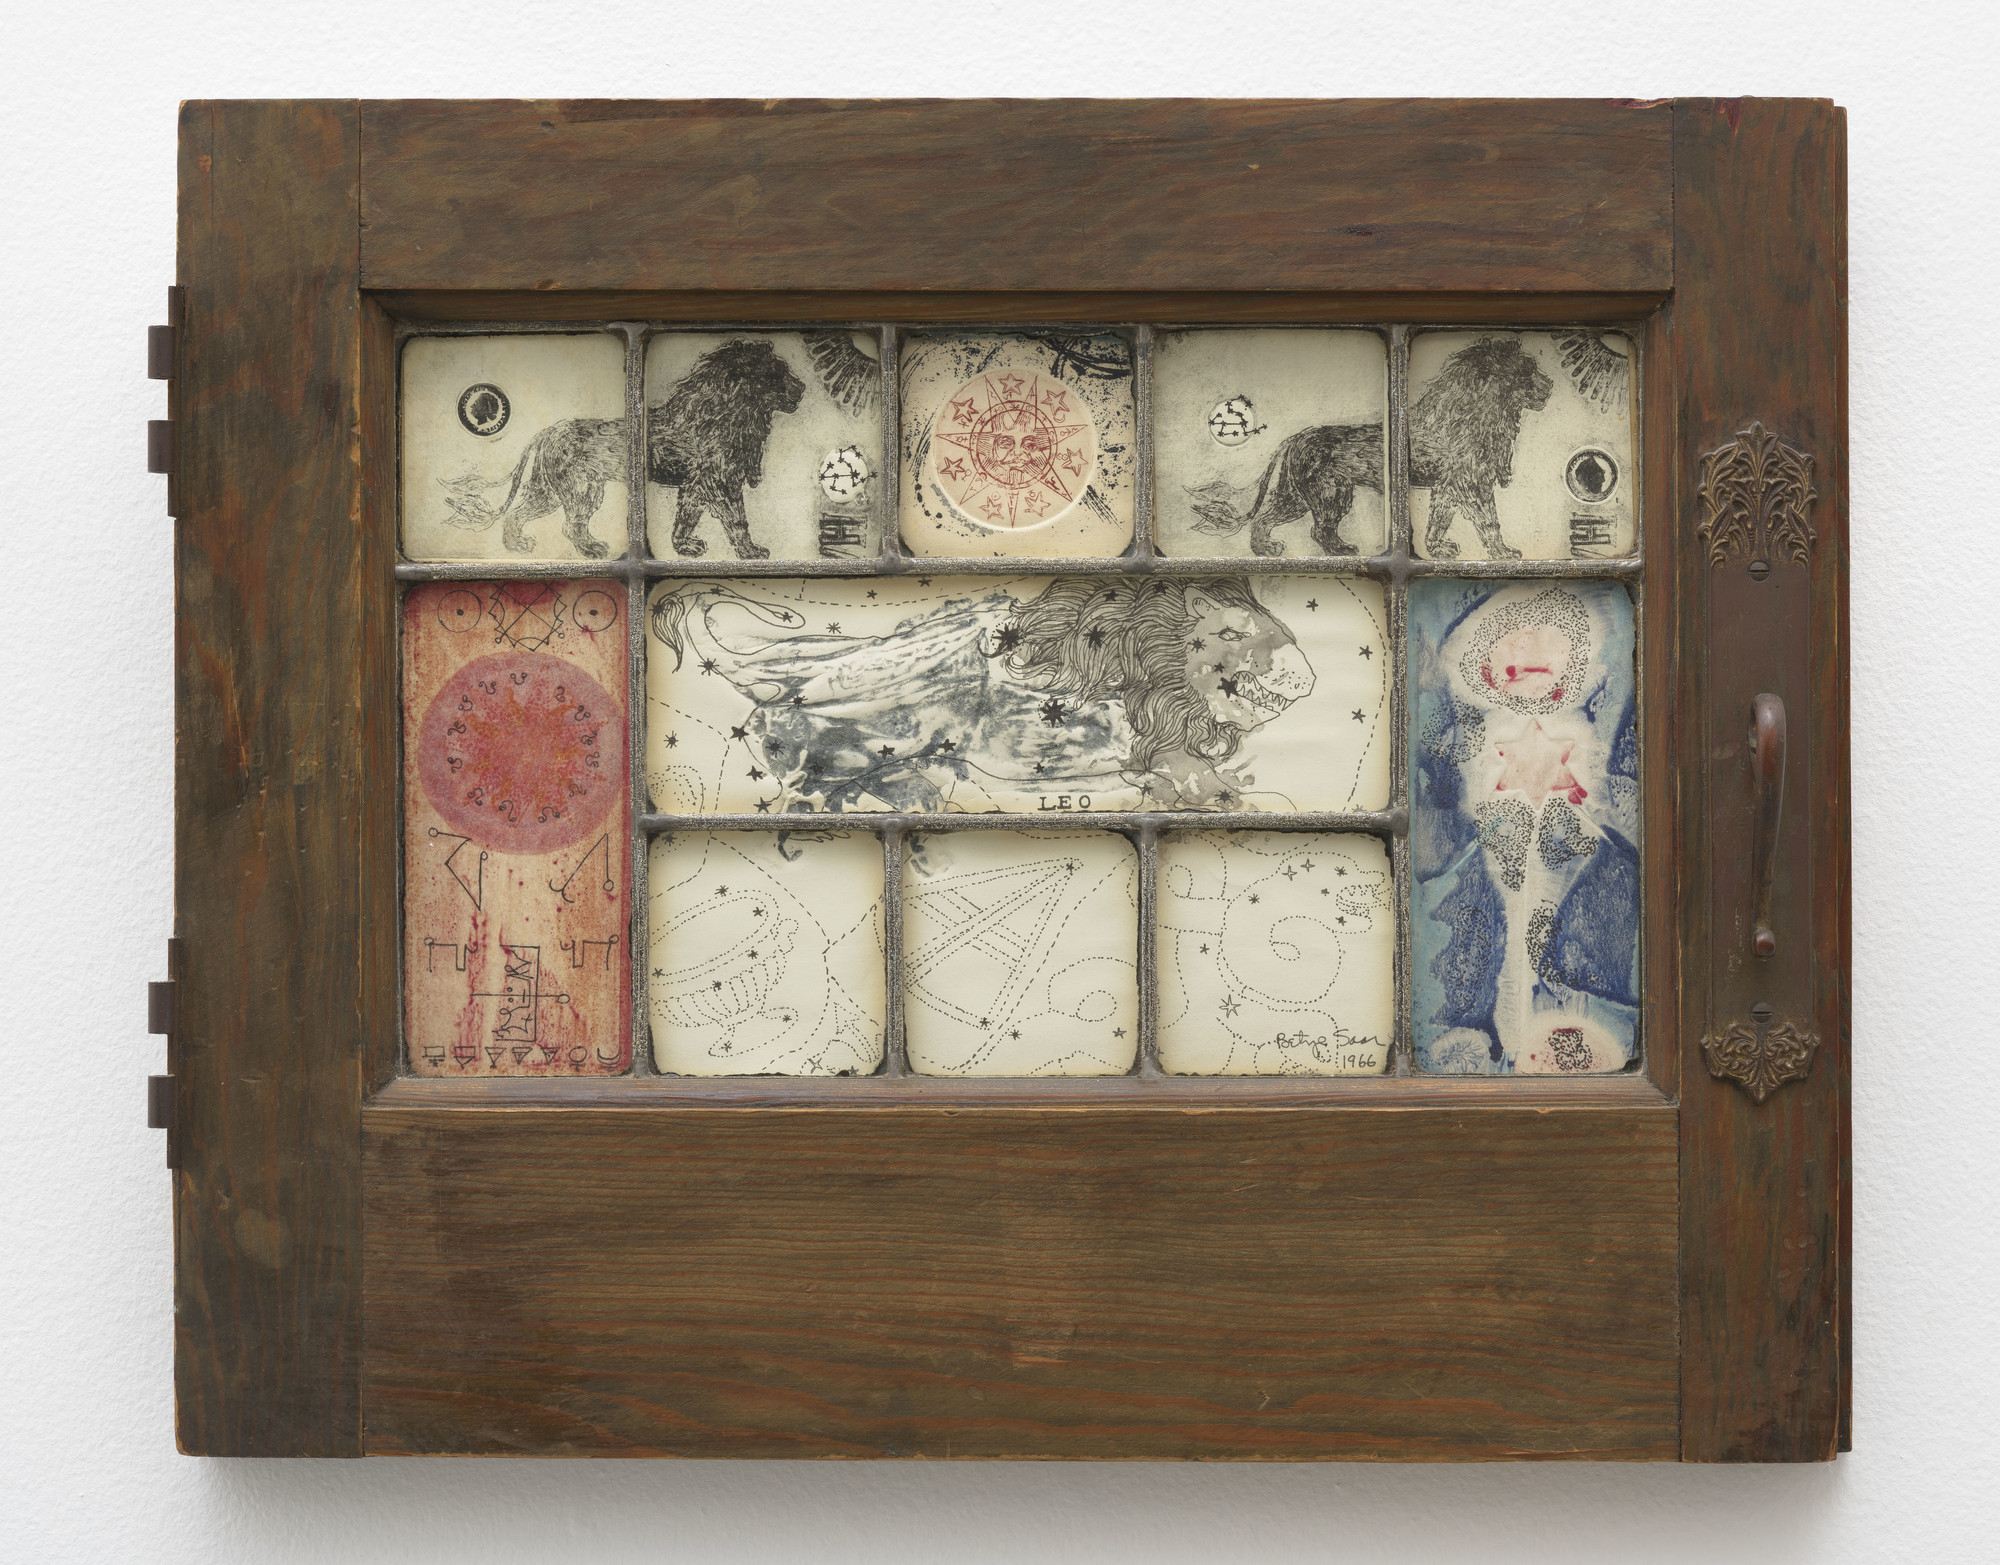 Betye Saar. _Mystic Window for Leo_. 1966. Wooden window frame with cut-and-pasted paper and printed paper with ink, colored pencil and embossing, 14 1/4 × 17 3/4" (36.2 × 45.1 cm). Collection Meghan R. Cavanaugh, Los Angeles. © 2019 Betye Saar, courtesy of the artist and Roberts Projects, Los Angeles; Photo Robert Wedemeyer